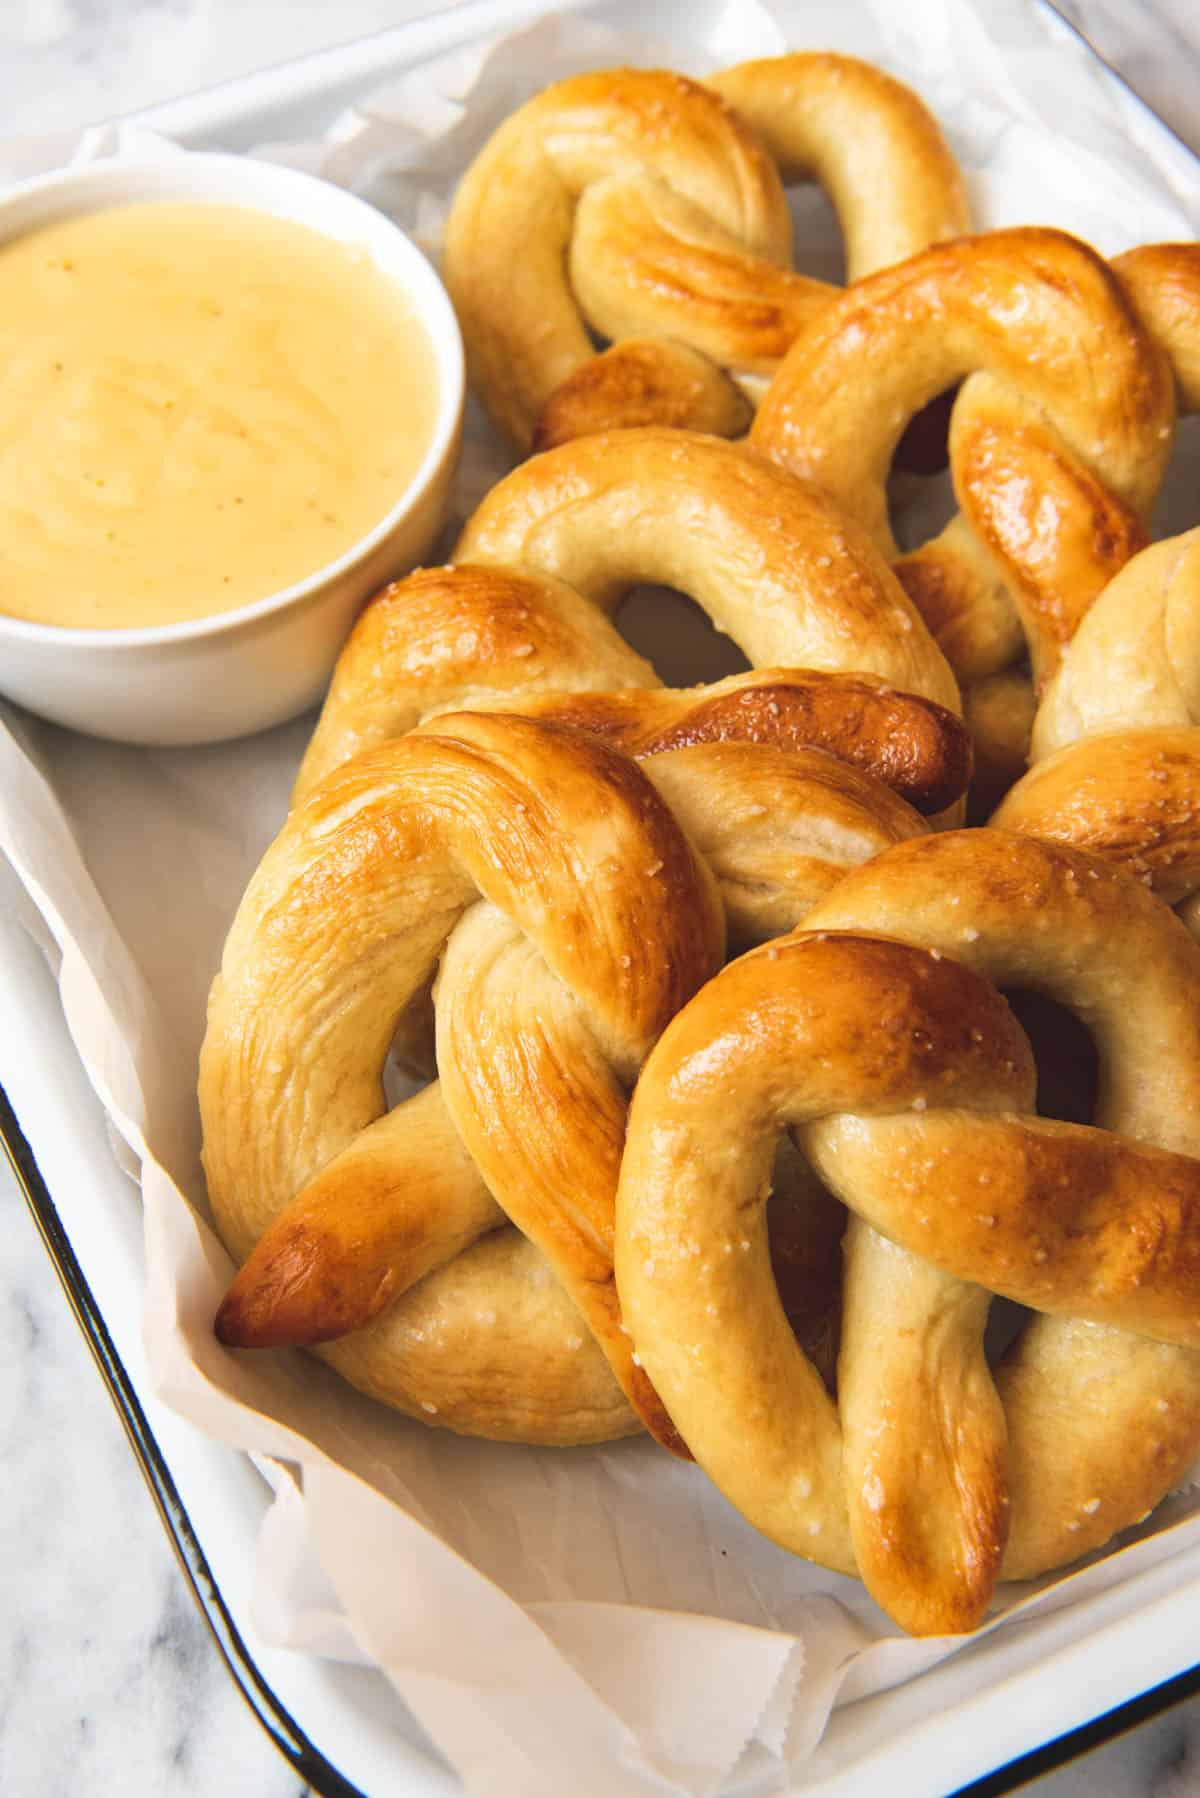 An image of pretzels on a plate with cheesy mustard sauce in a little dish to dip pretzels in.